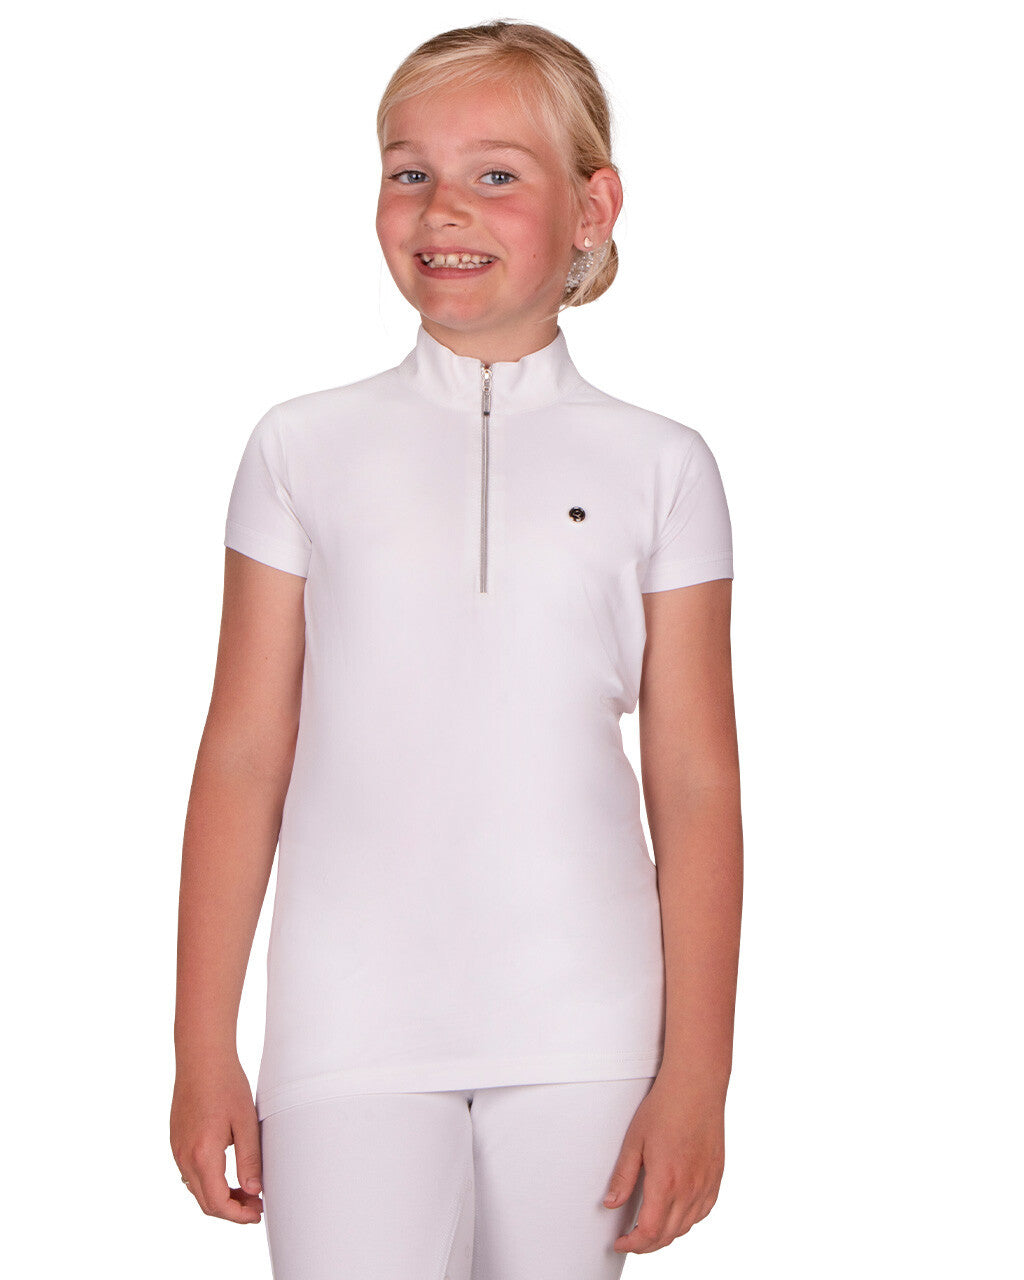 Competition Shirt - Veerle